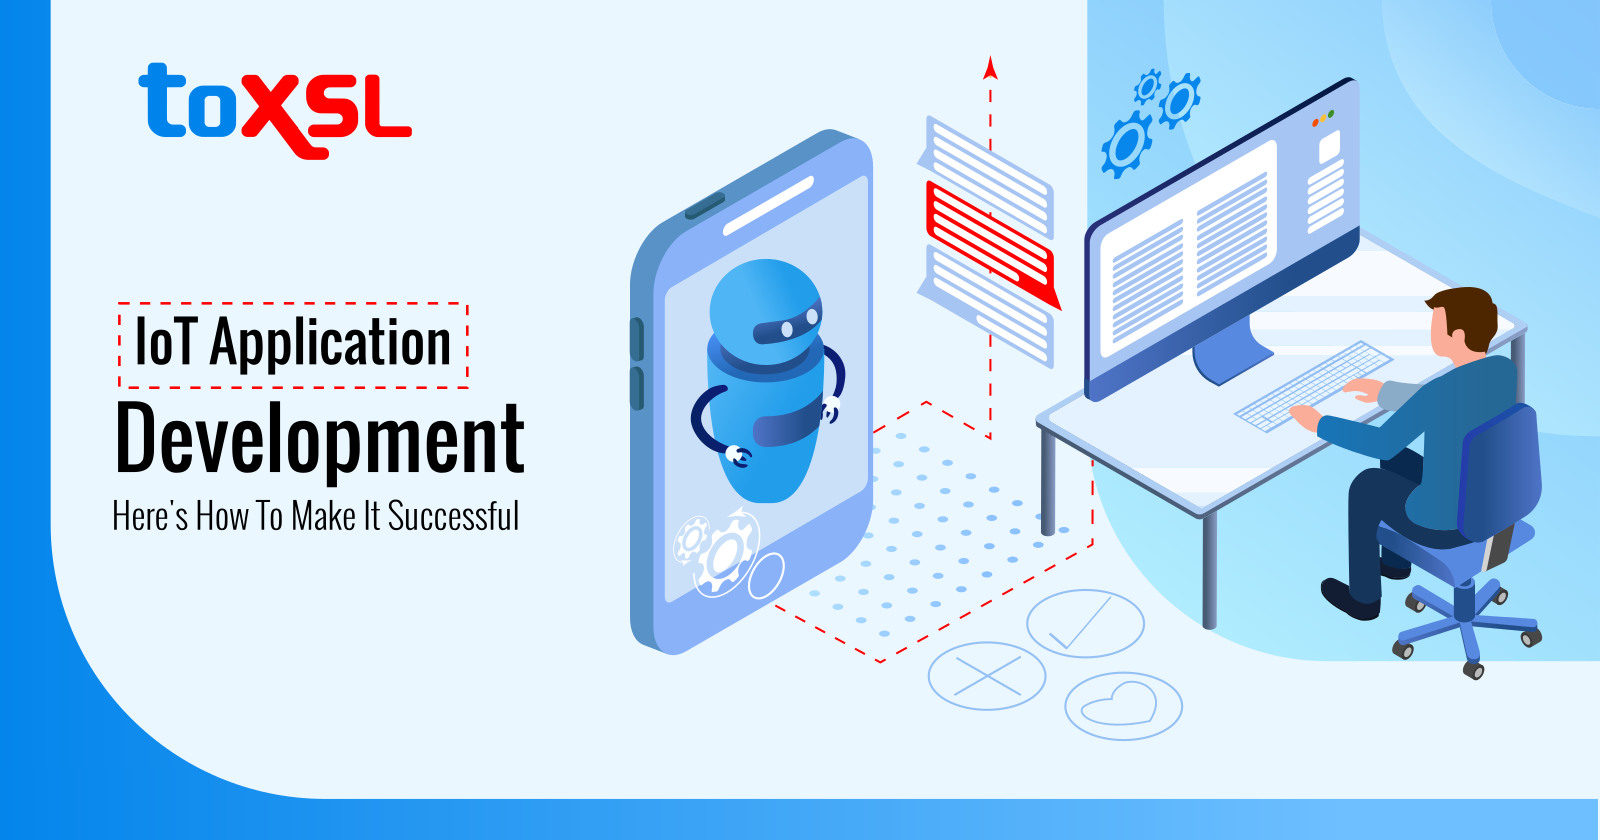 IoT Application Development: Here's How To Make It Successful